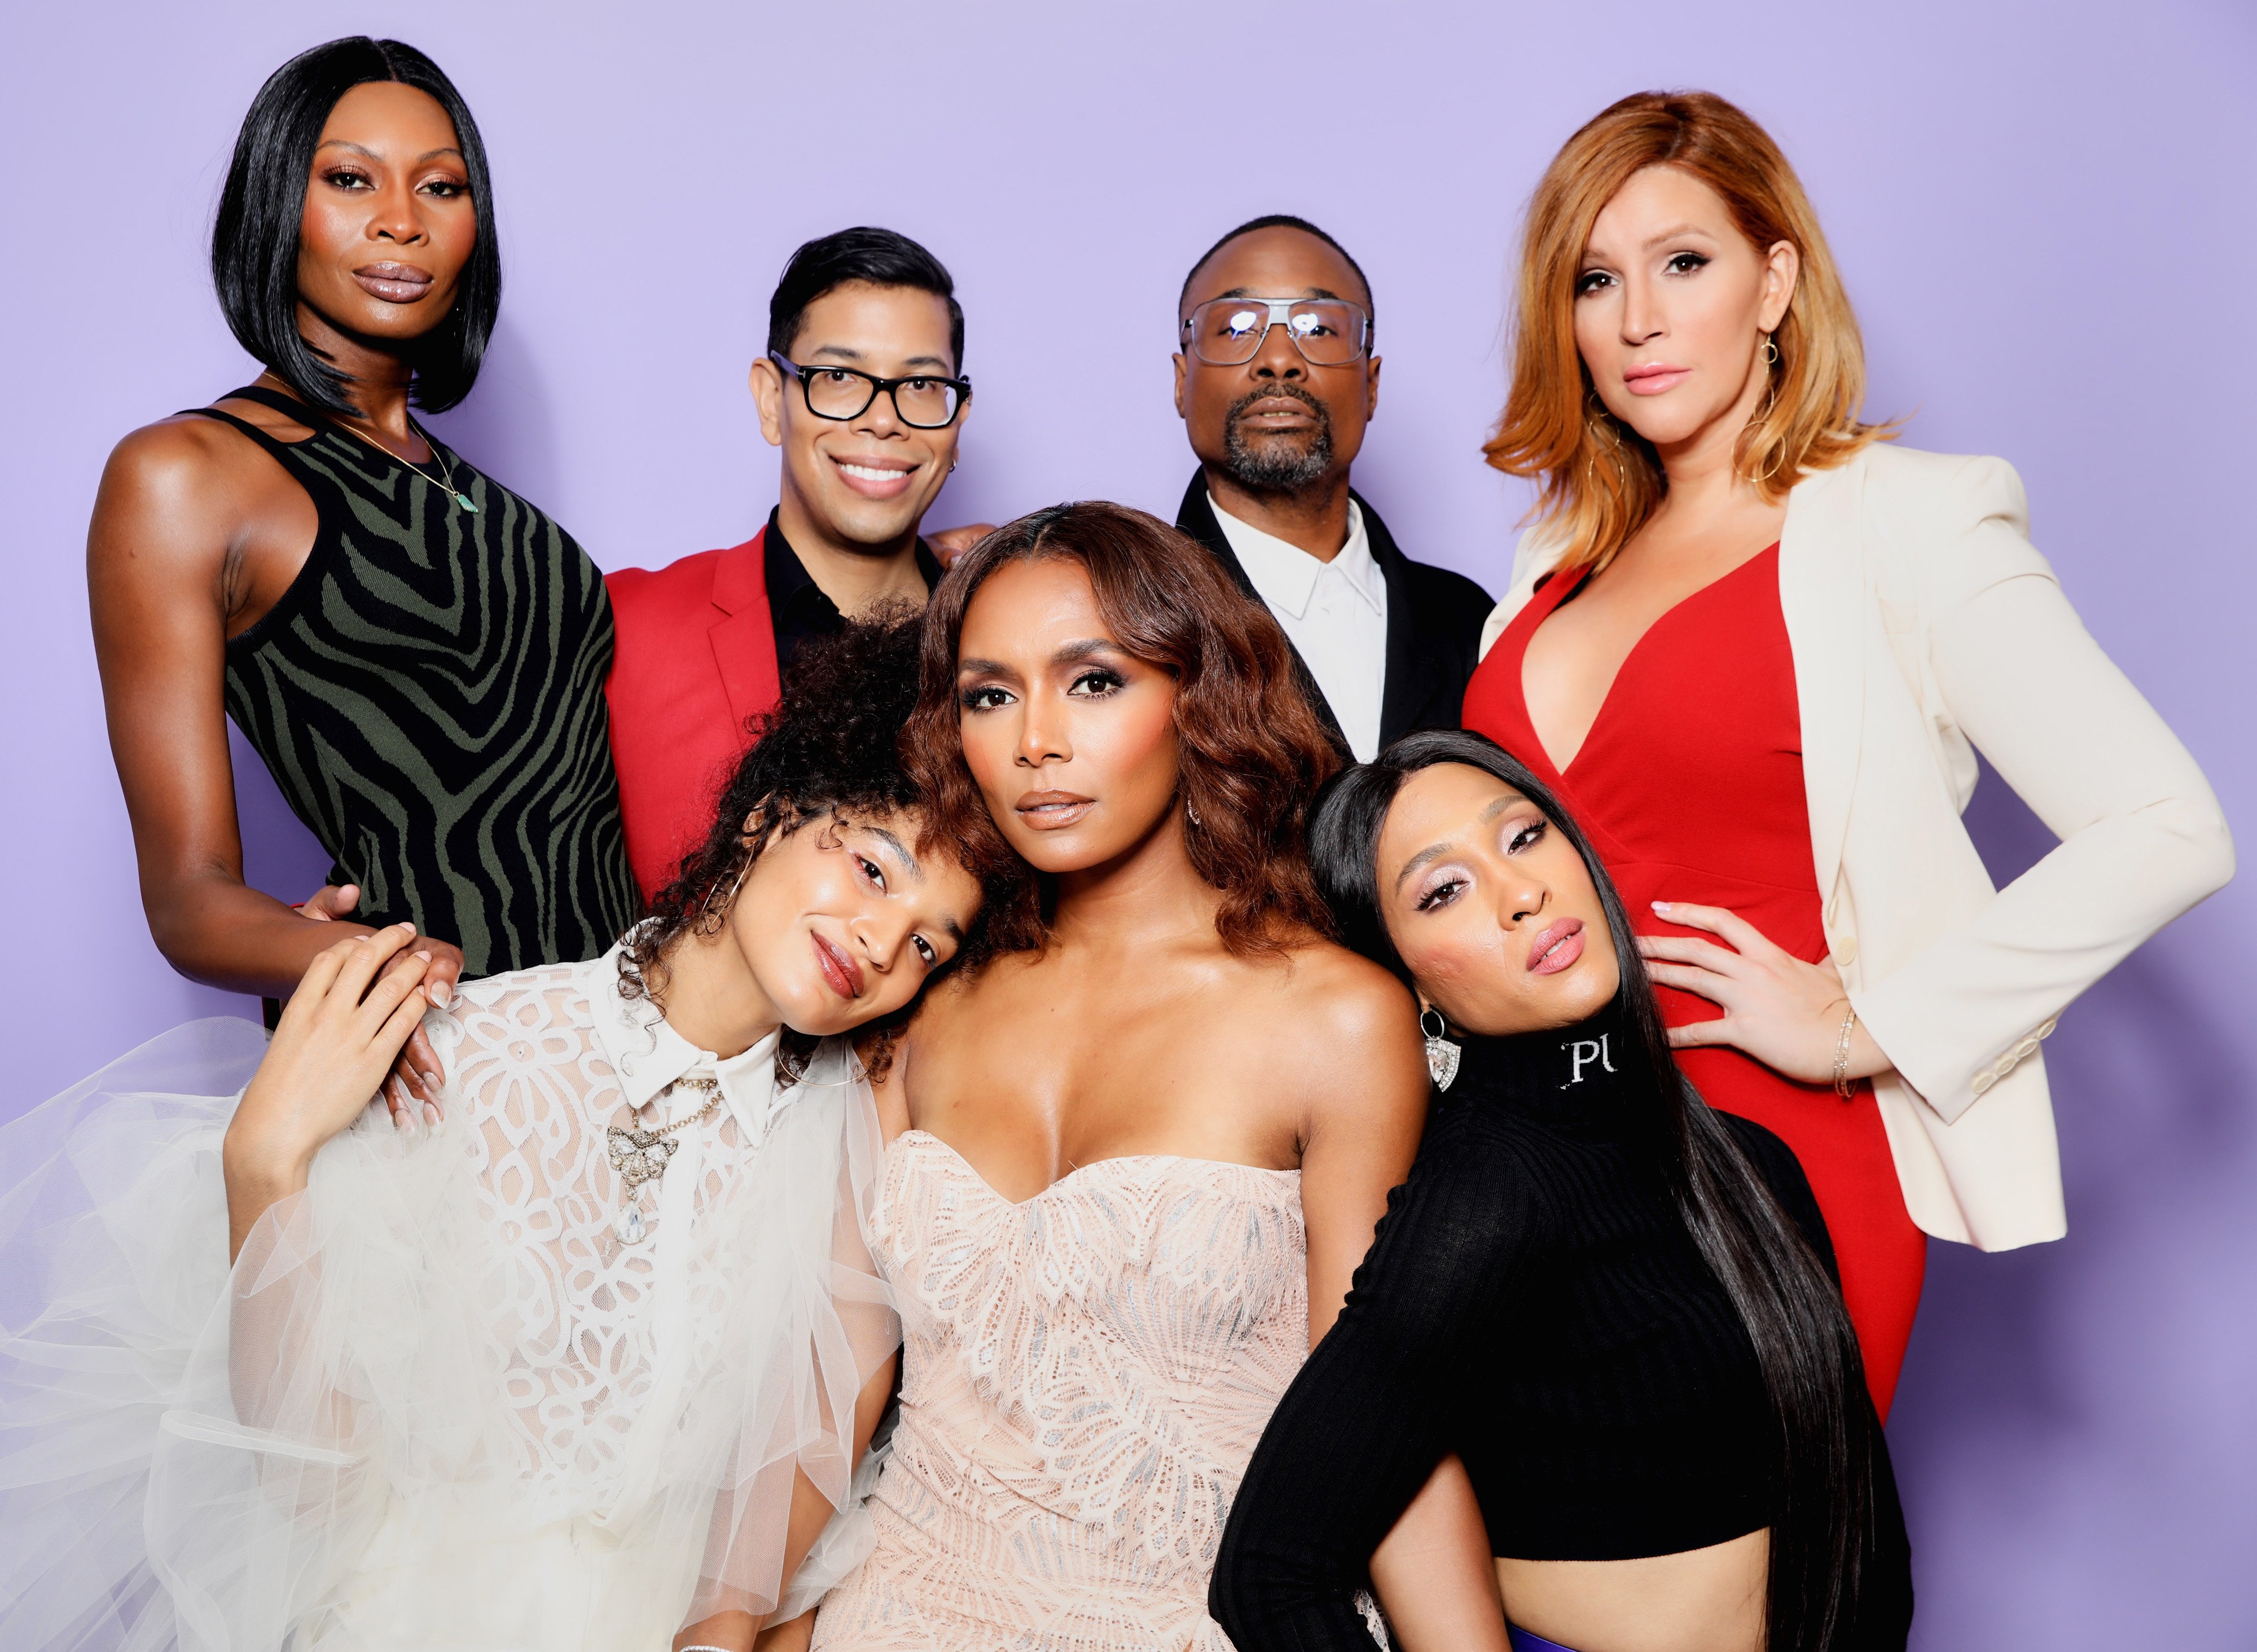 'Pose' showrunner Steven Canals with Dominique Jackson, Billy Porter, Our Lady J, Indya Moore, Janet Mock, and MJ Rodriguez at the Critics Choice Award.